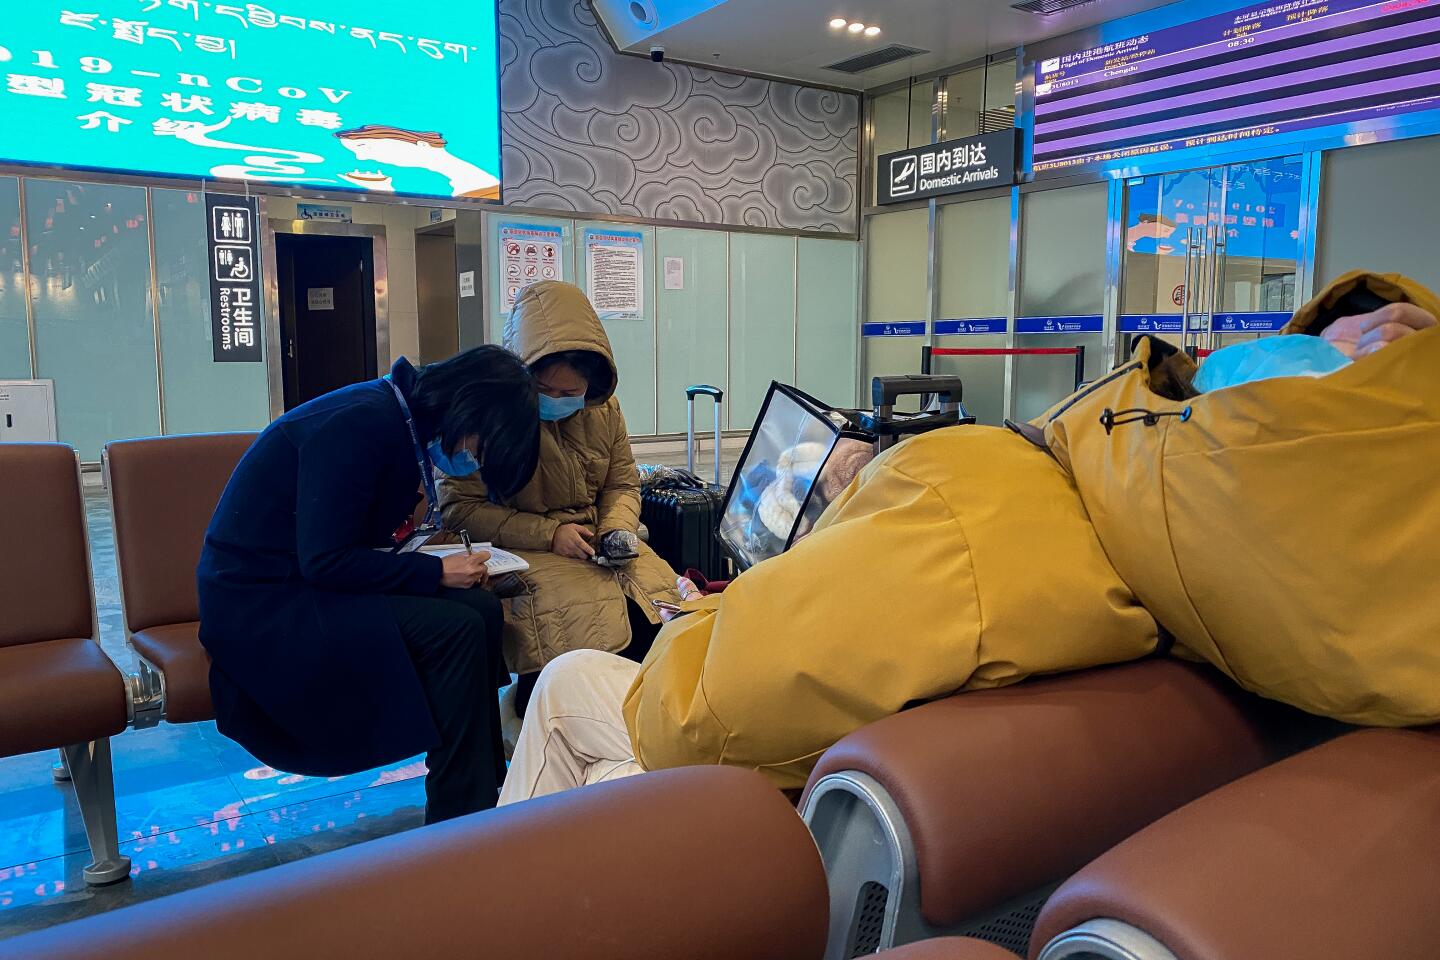 Airport workers took down medical information as some travelers slept in Garze airport on Feb. 15, 2020.